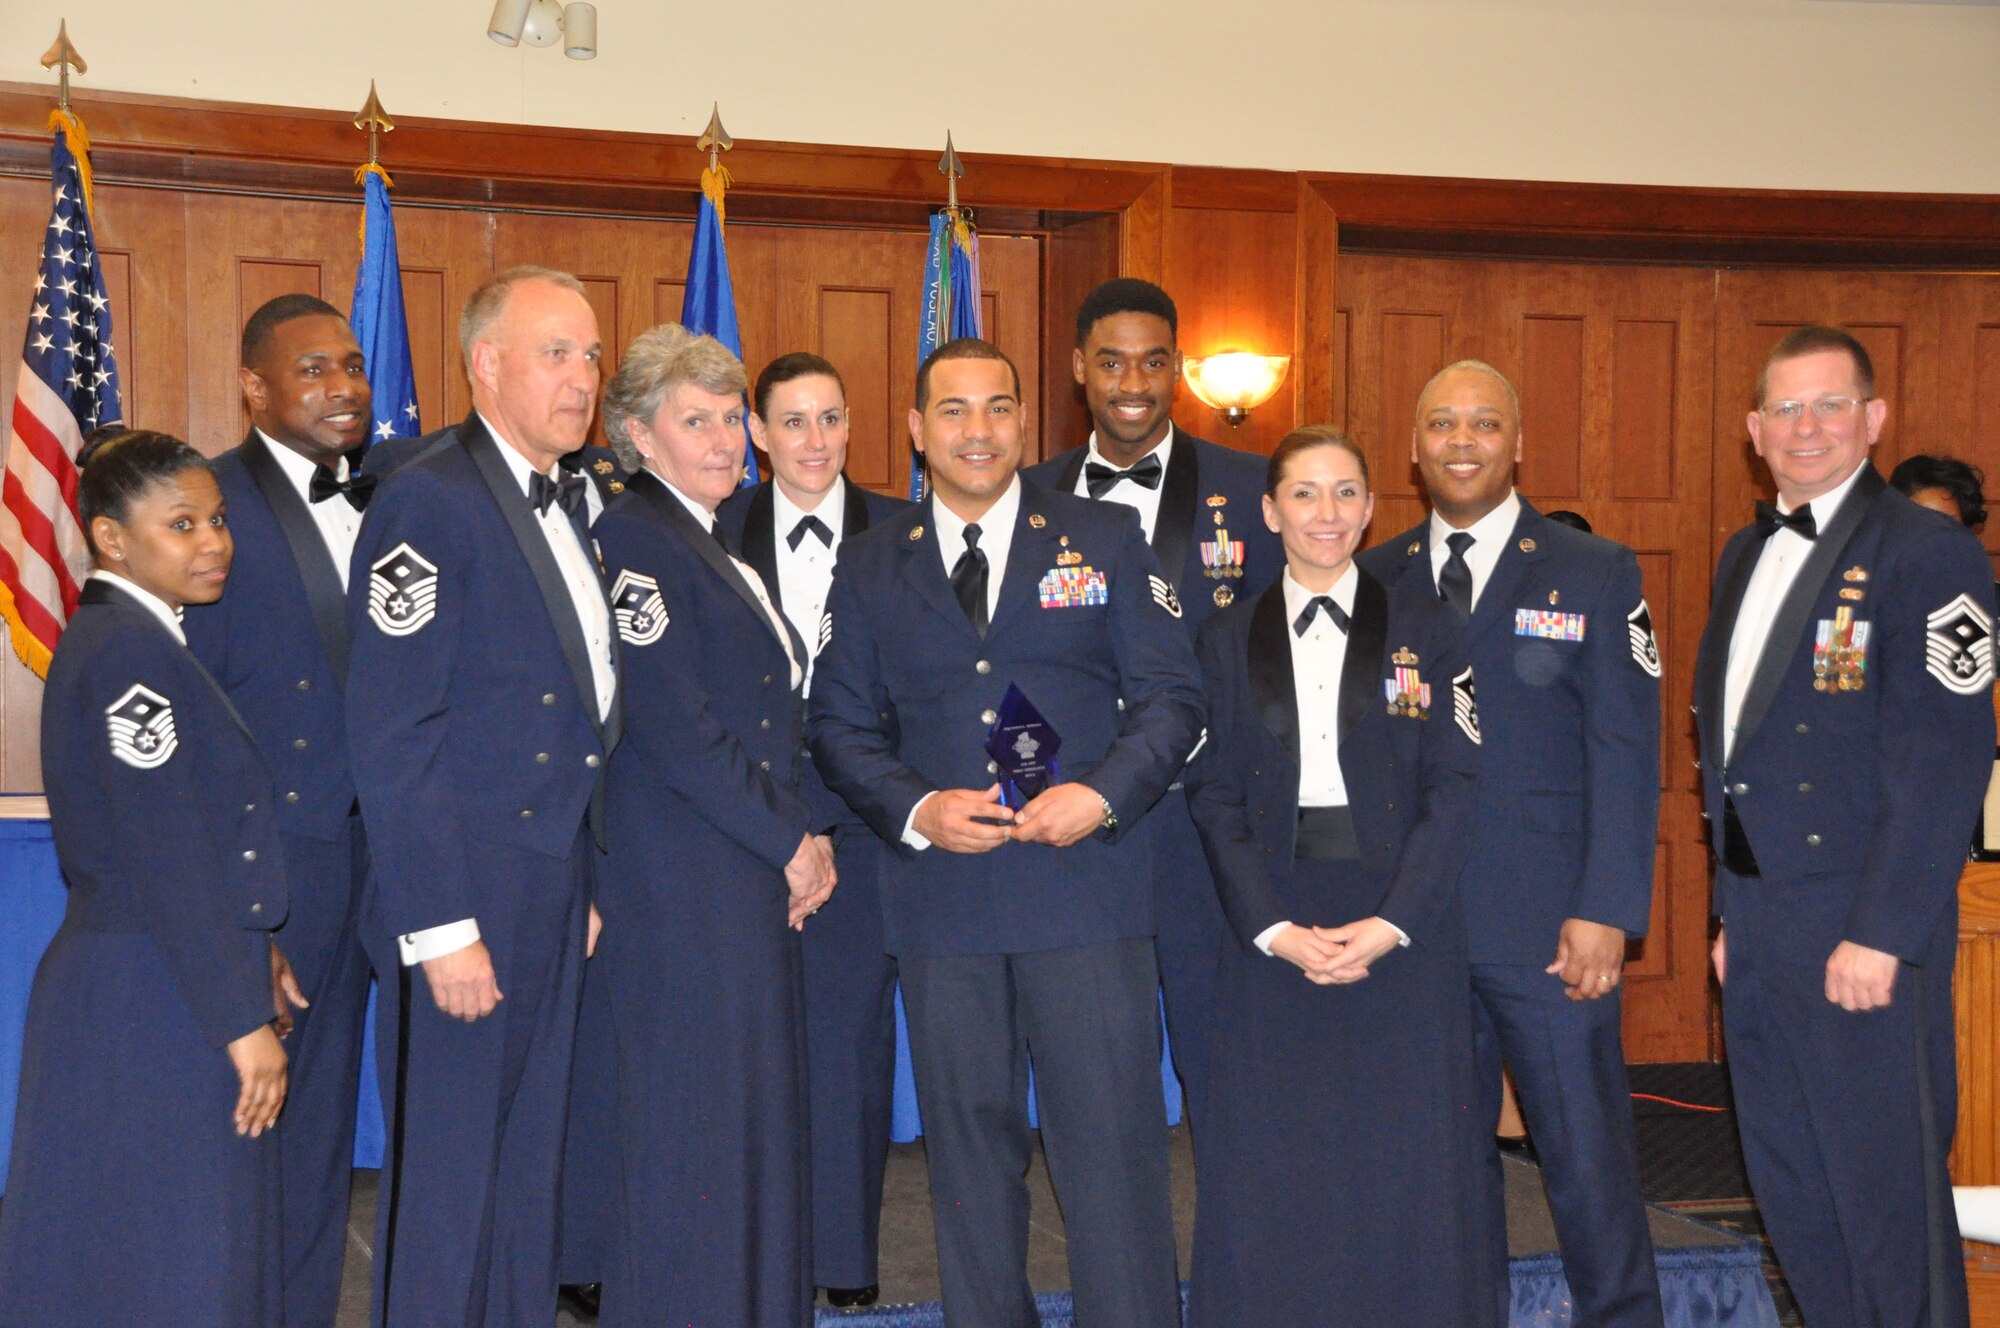 Staff Sgt. Robert McKinney, 459th Aerospace Medicine Squadron, wins the 459th First Sergeants Council's Diamond Sharp Award at the 459 ARW Annual Awards Banquet on Saturday, March 7, 2015. He is flanked by members of the 459th First Sergeants Council. (Air Force Photo / SrA Kristin Kurtz)
